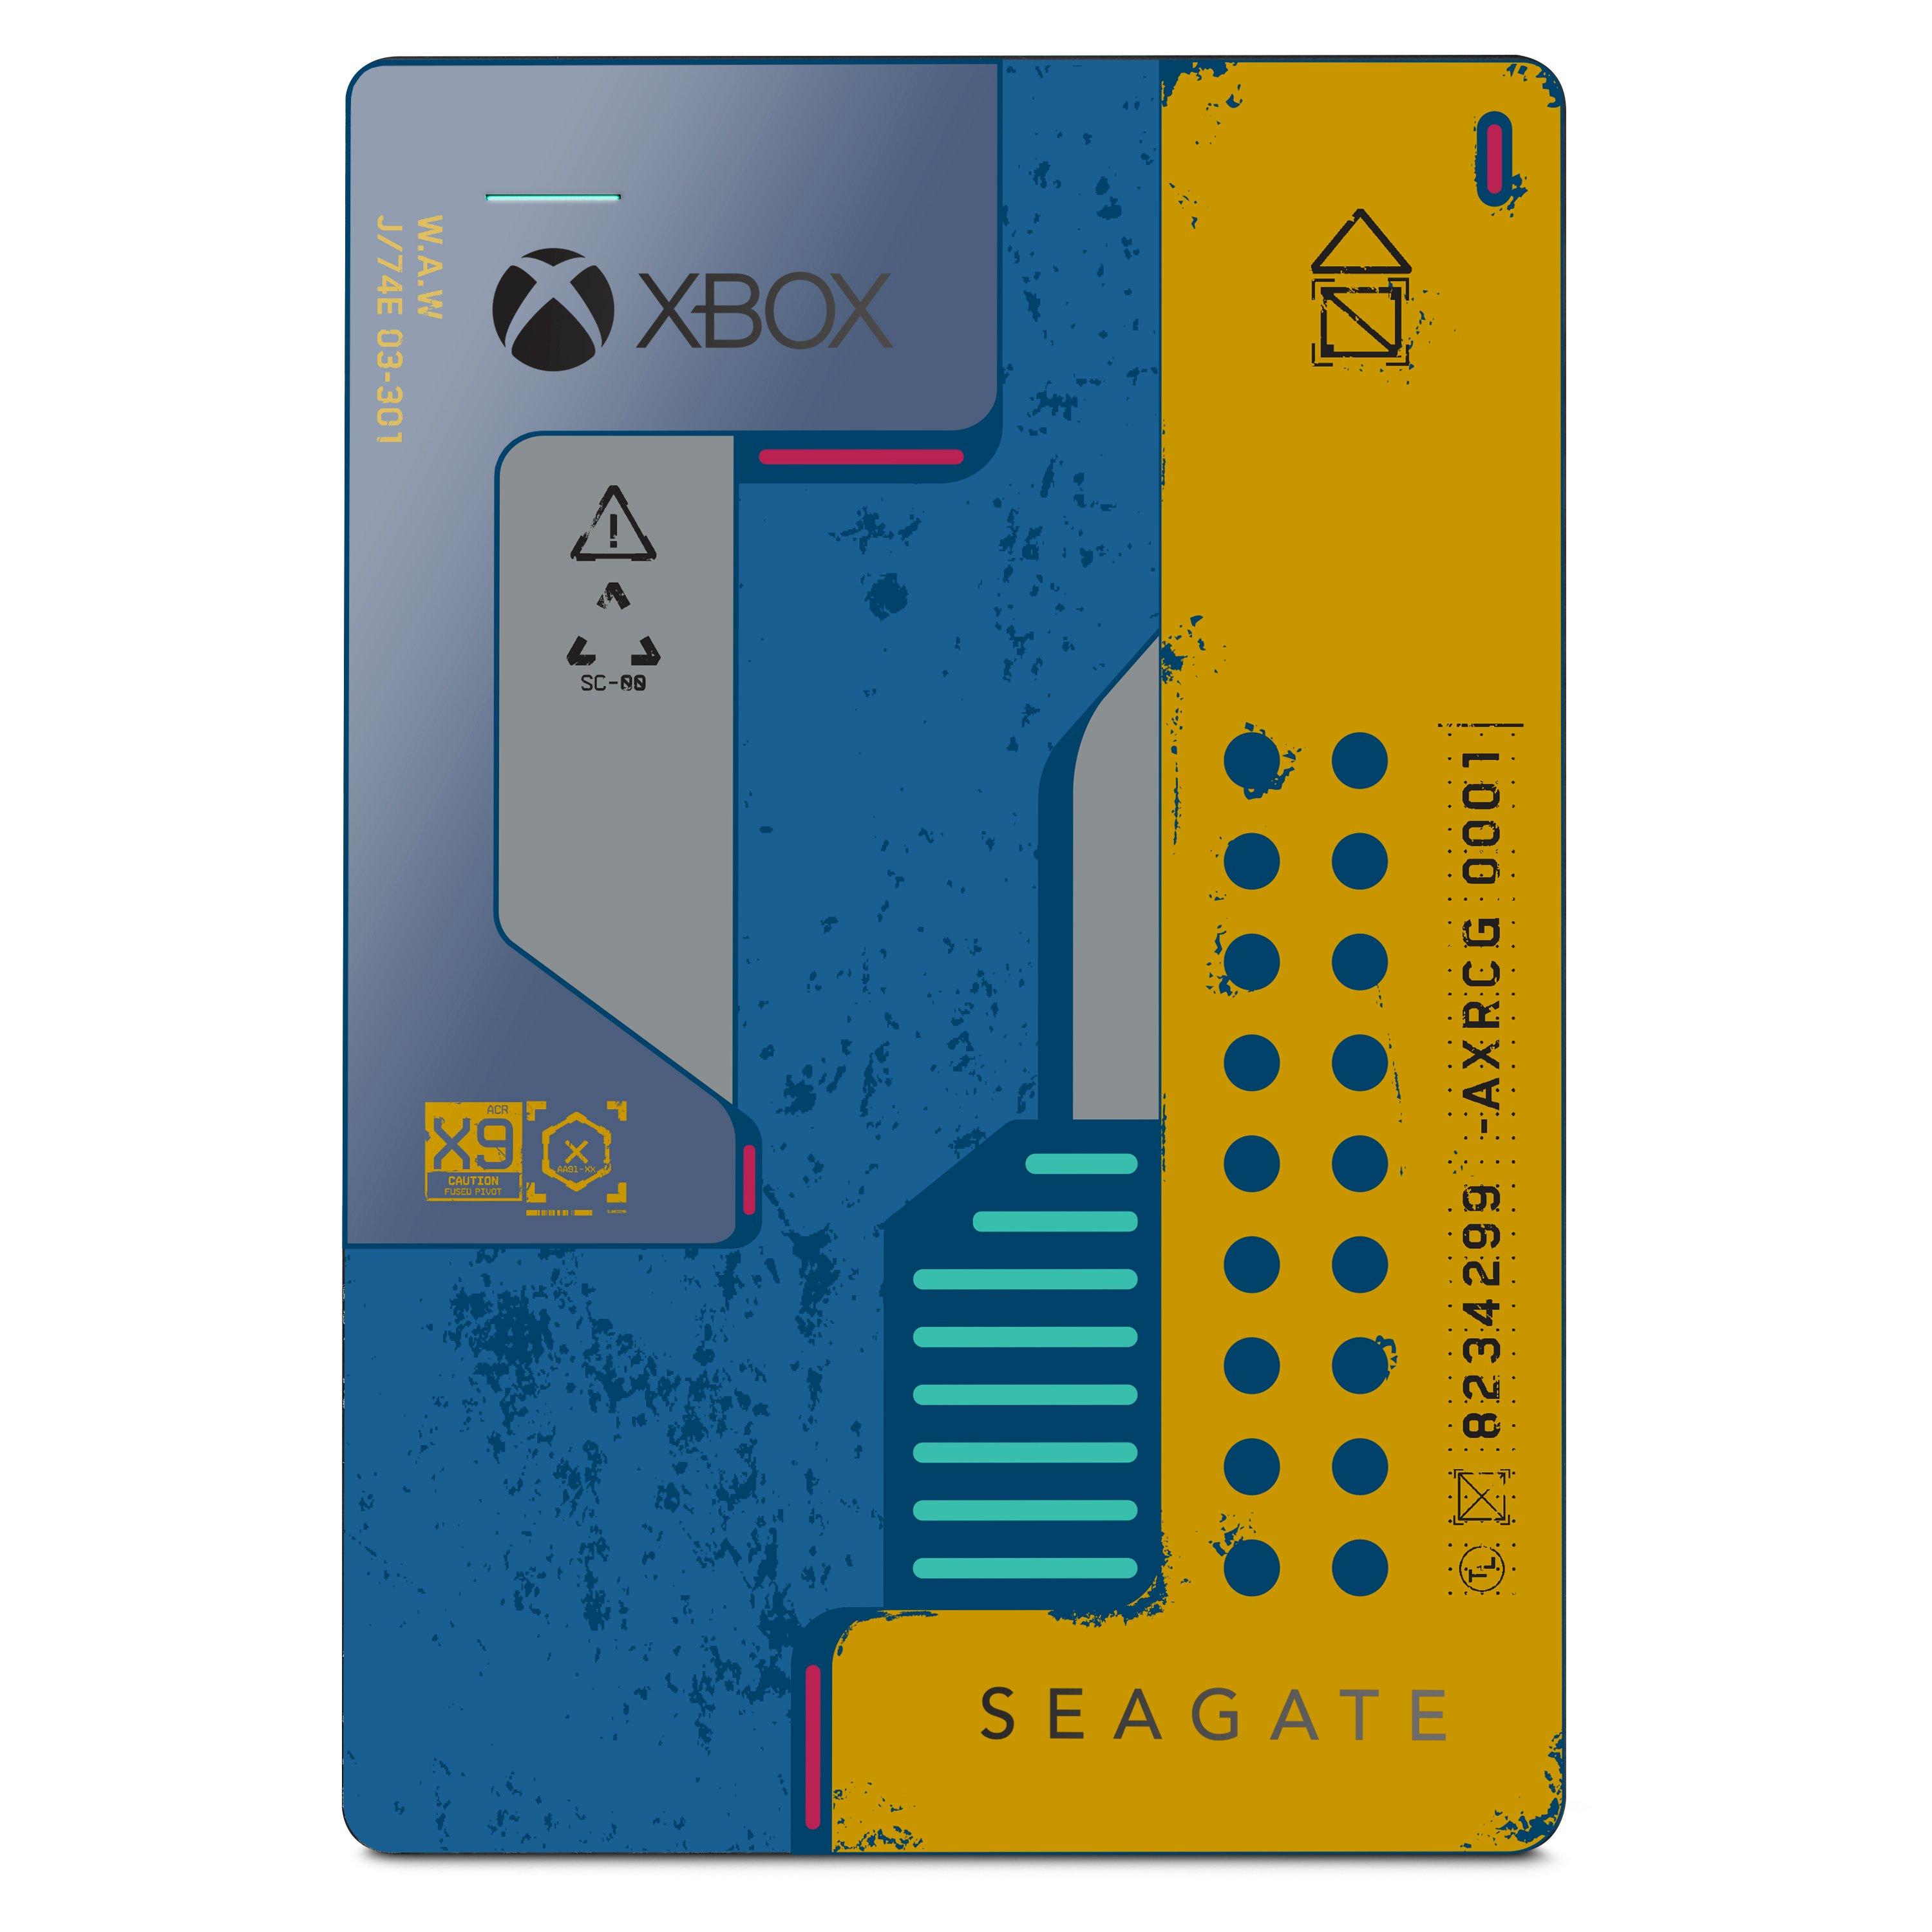 Seagate 2TB Game Drive for Xbox One